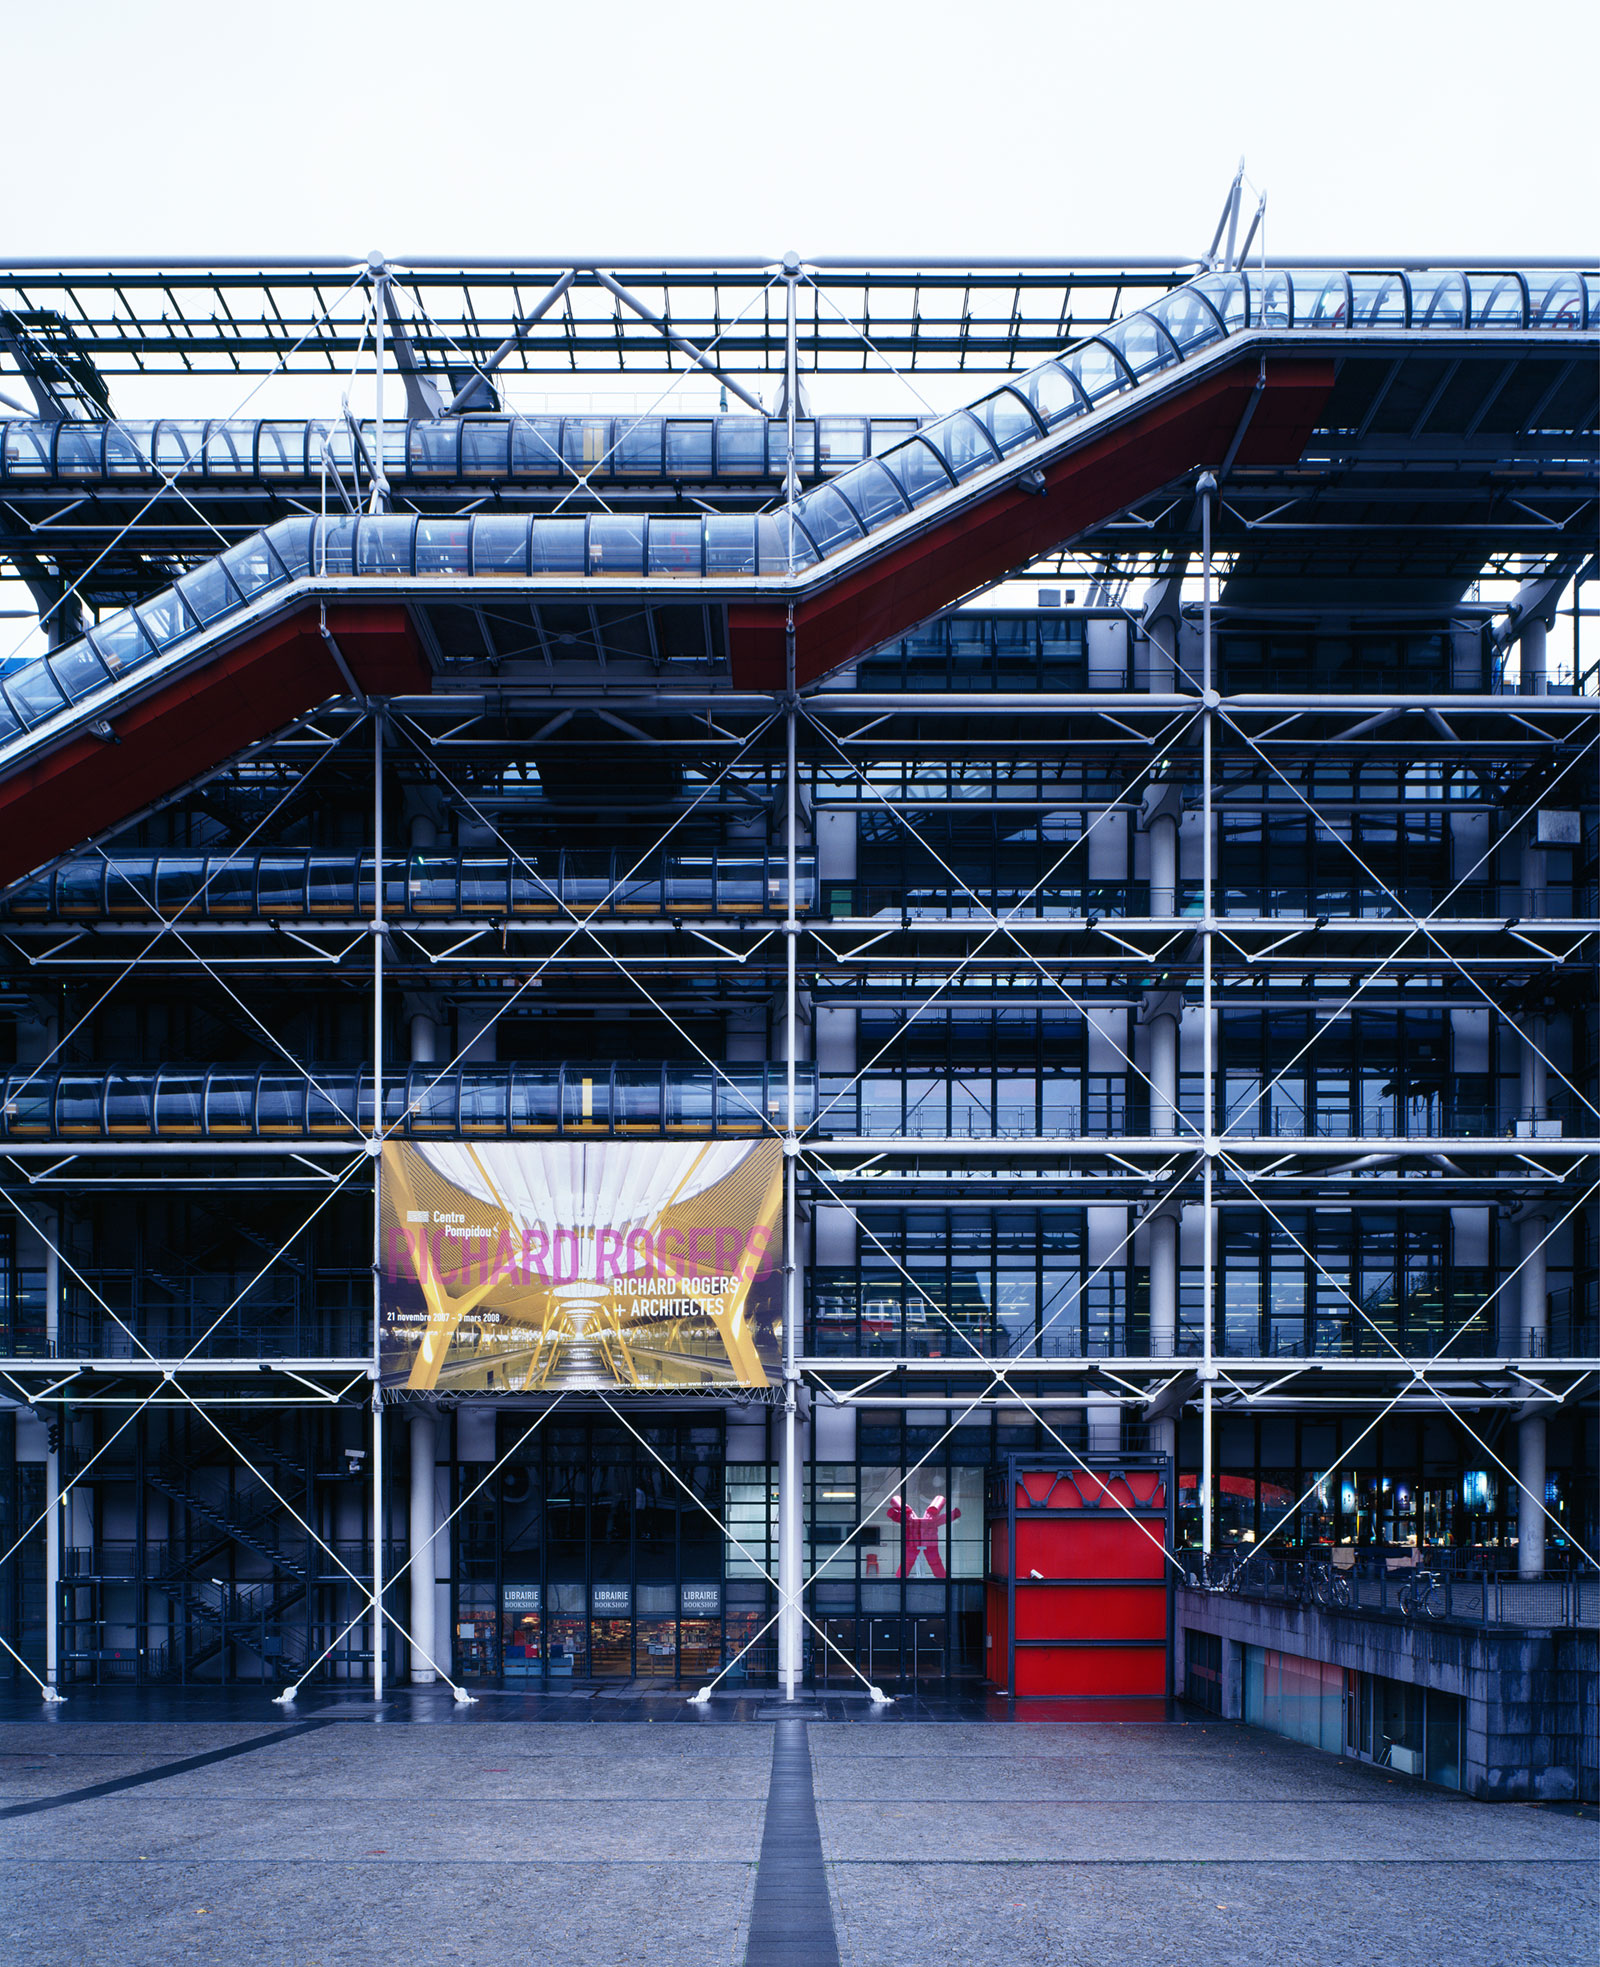 Richard Rogers + Architects: From the House to the City